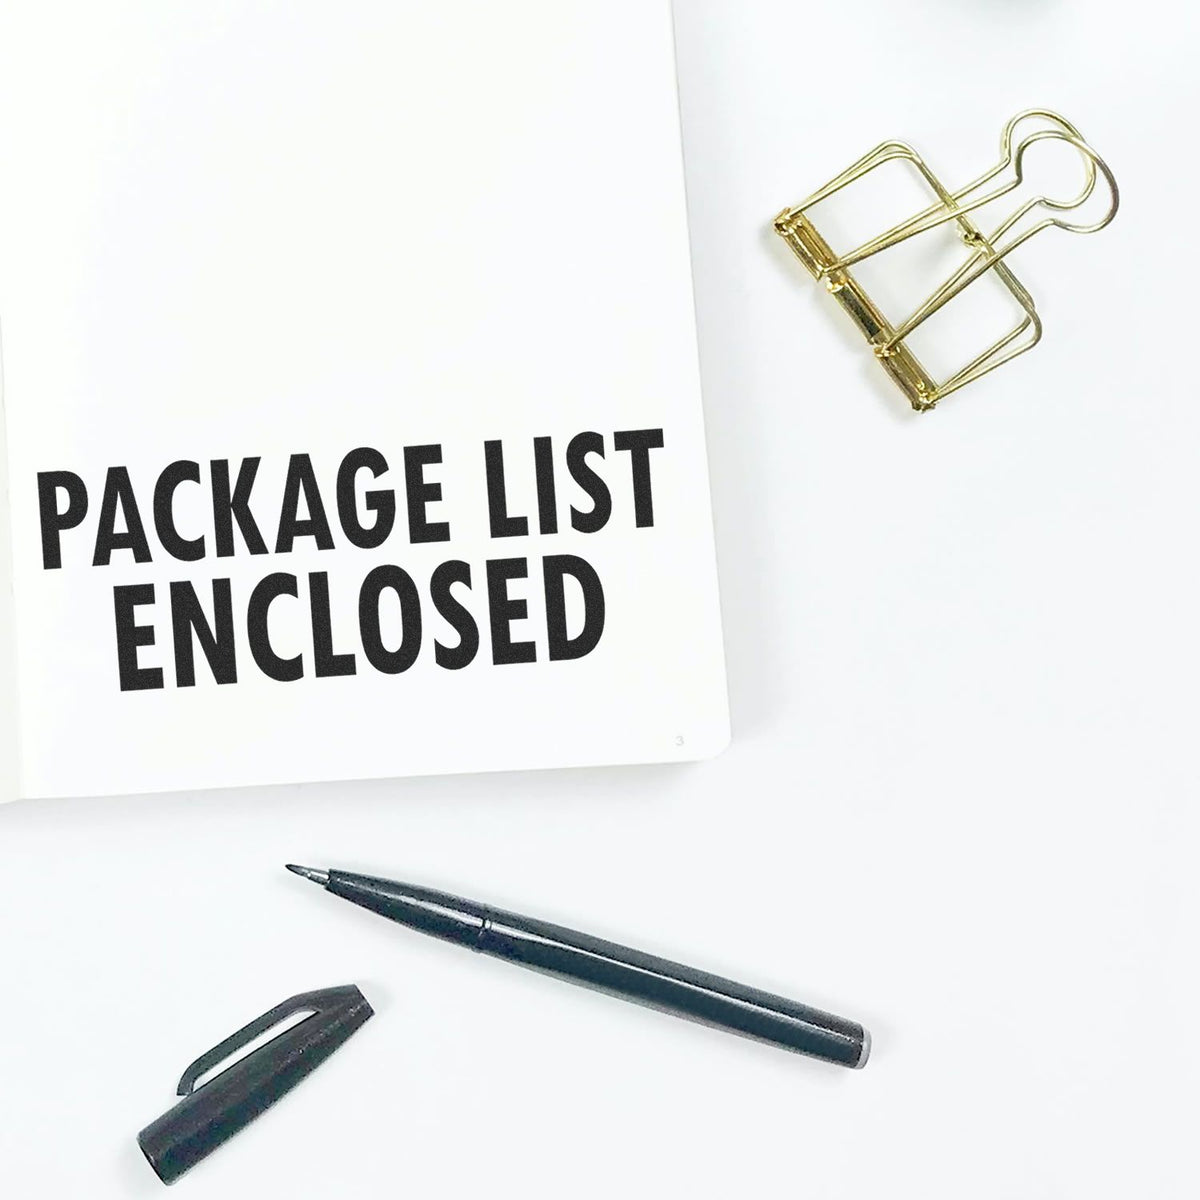 Large Self-Inking Package List Enclosed Stamp Lifestyle Photo